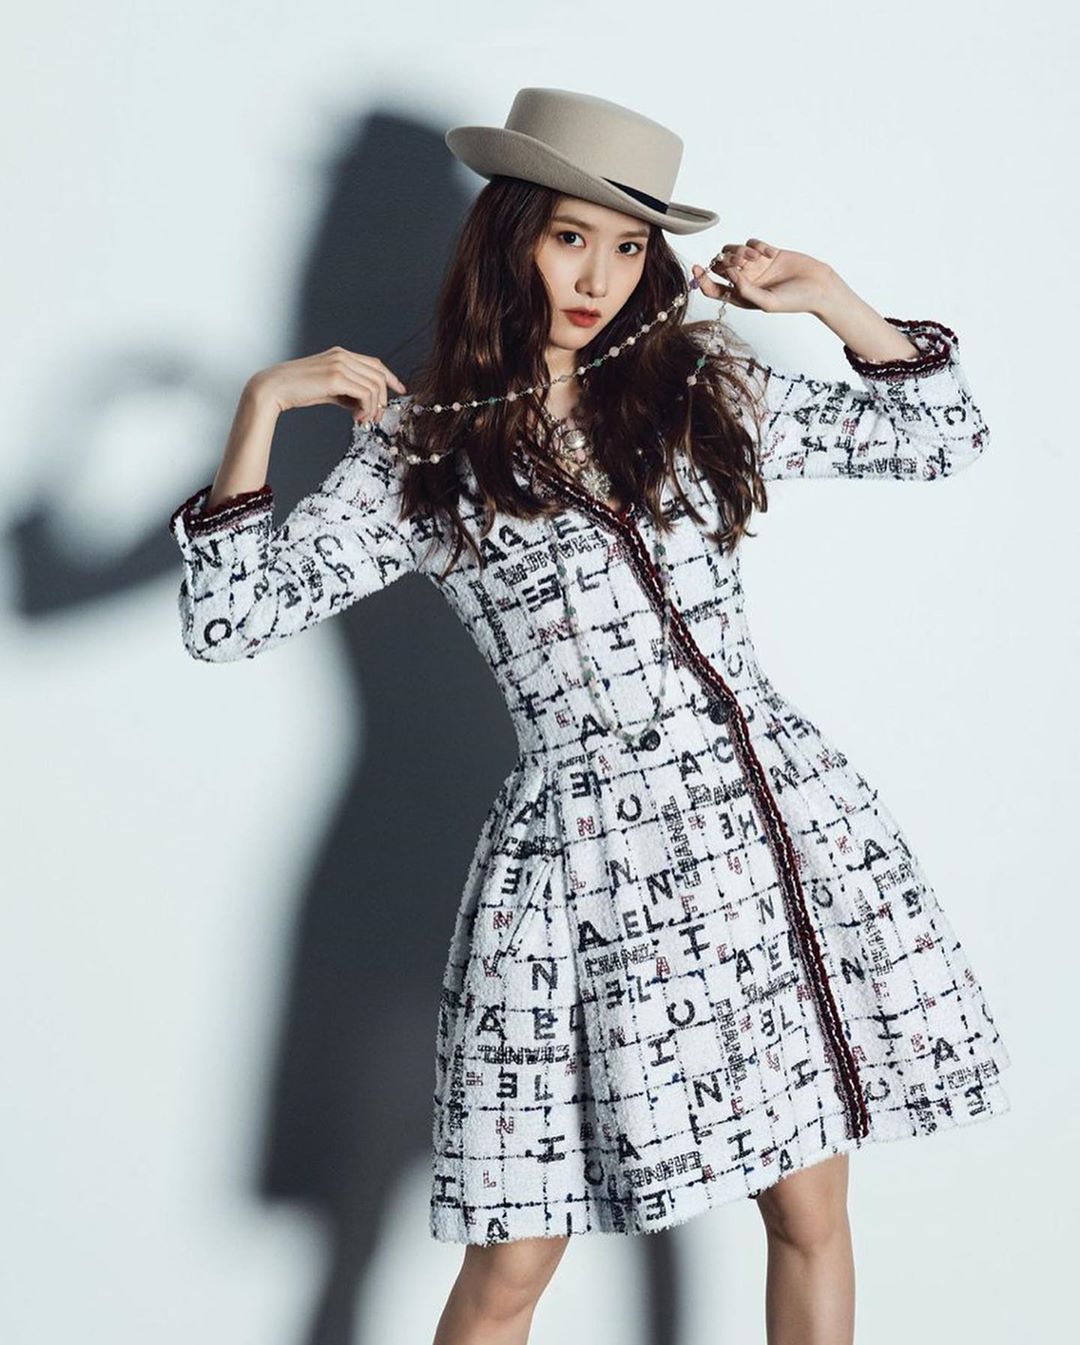 SNSD YoonA graces the latest issue of L'Officiel - Wonderful Generation